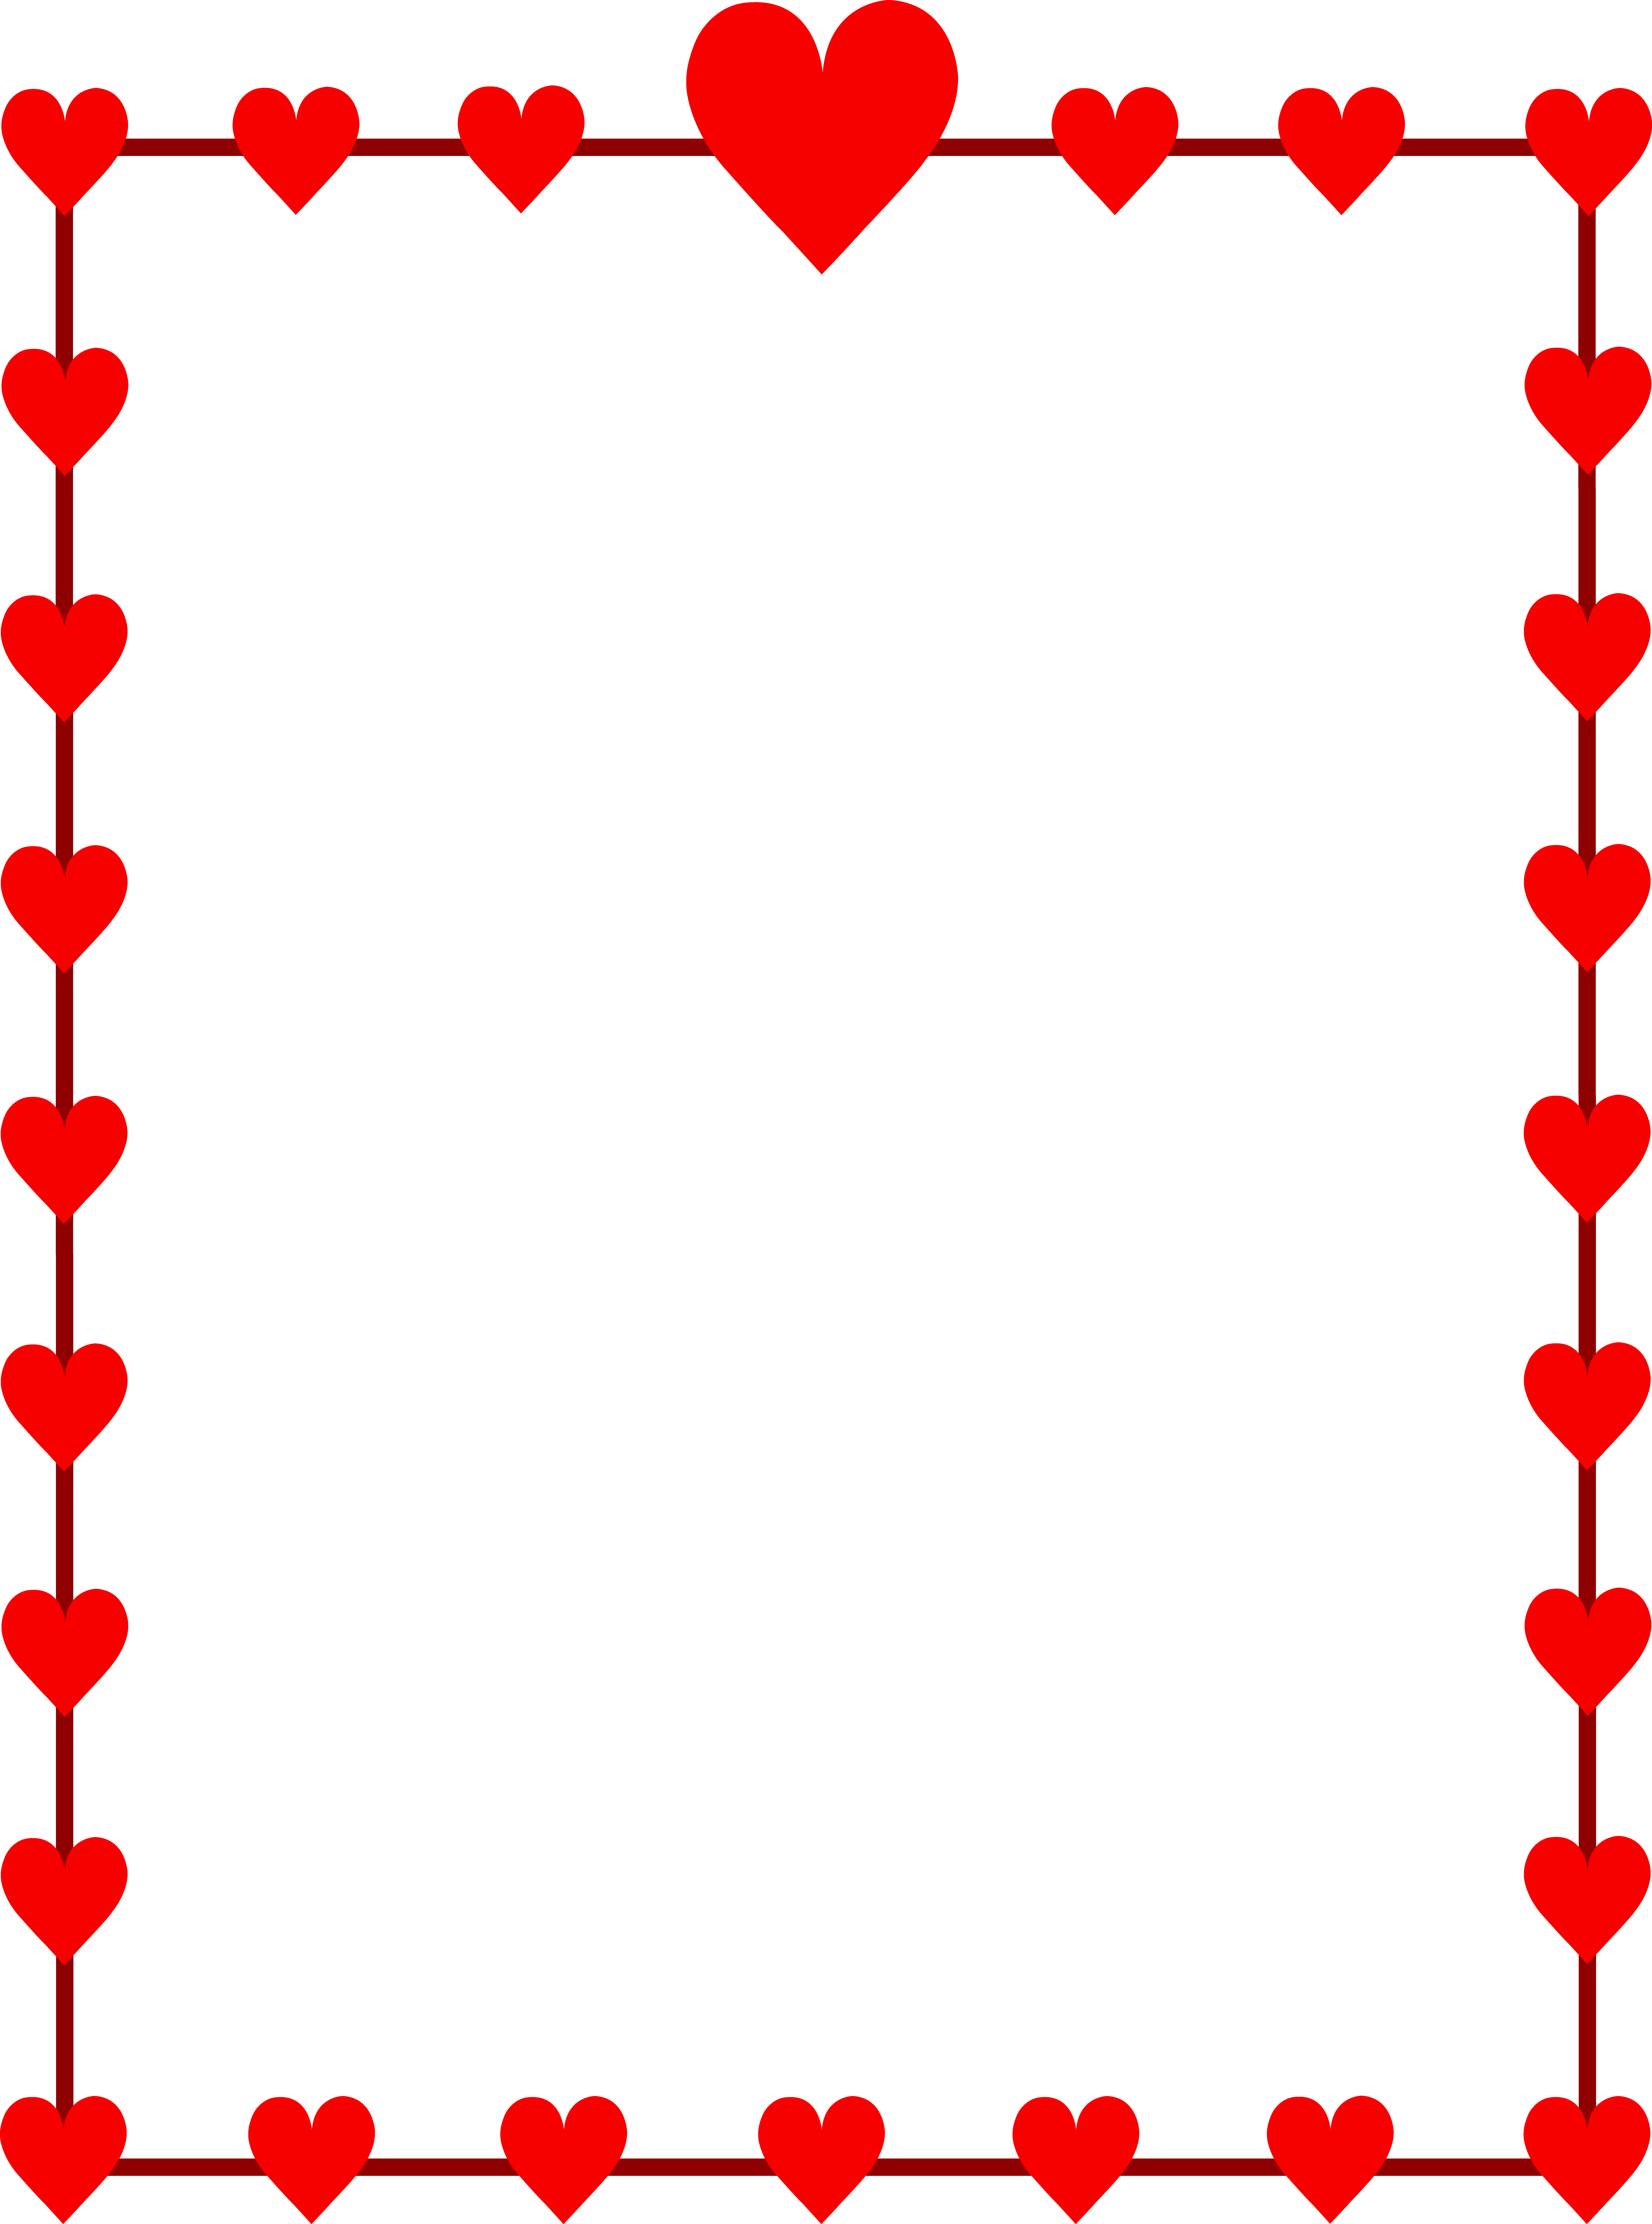 Red Hearts Border Frame - Free Clip Art